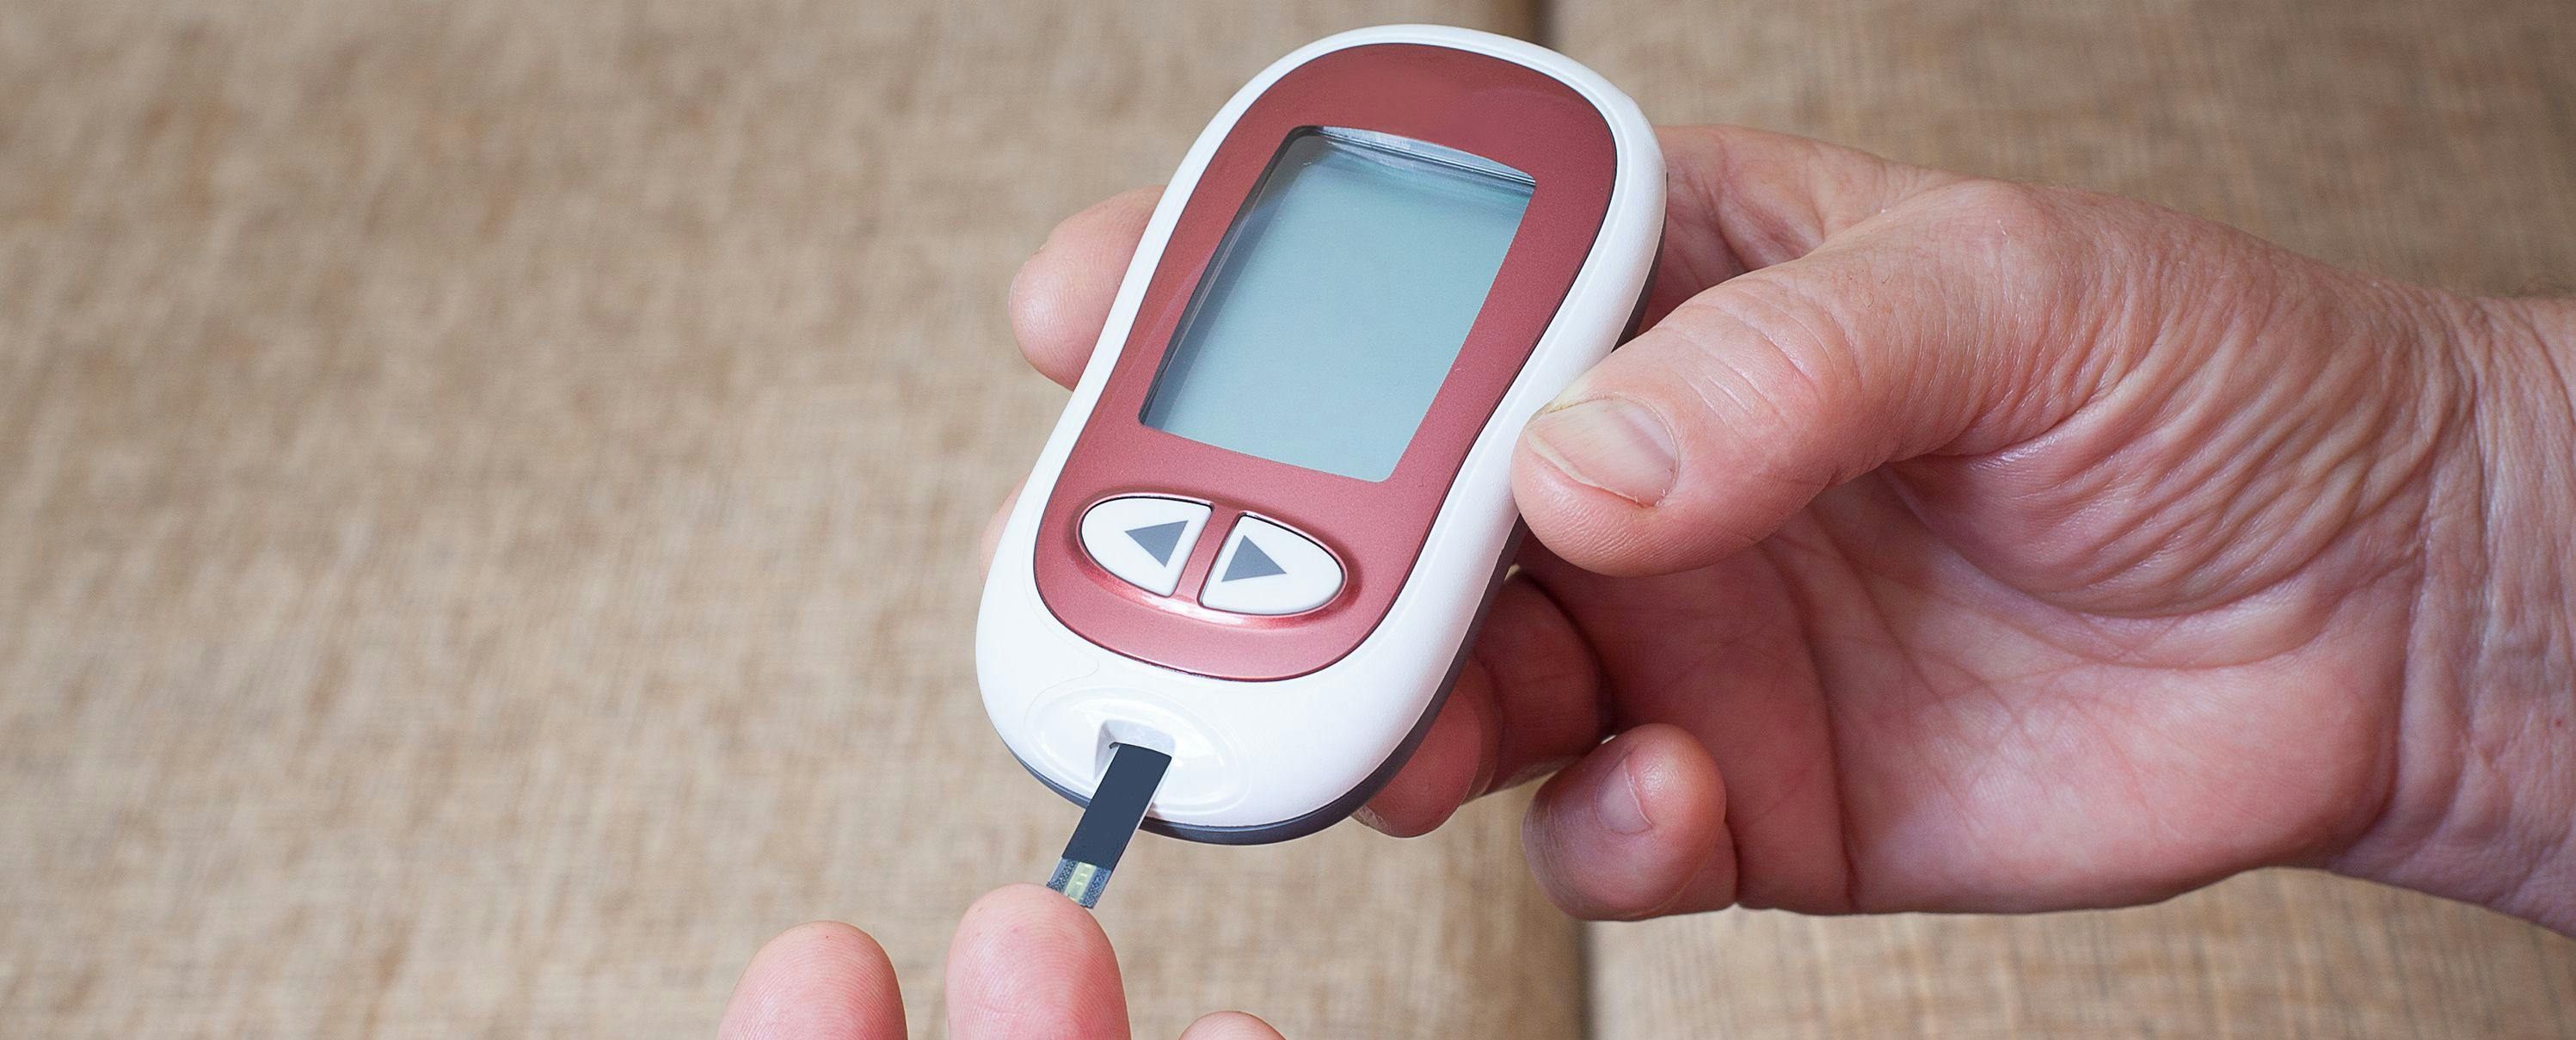 CDC: 1 in 5 Young Diabetics Lack Sufficient Care